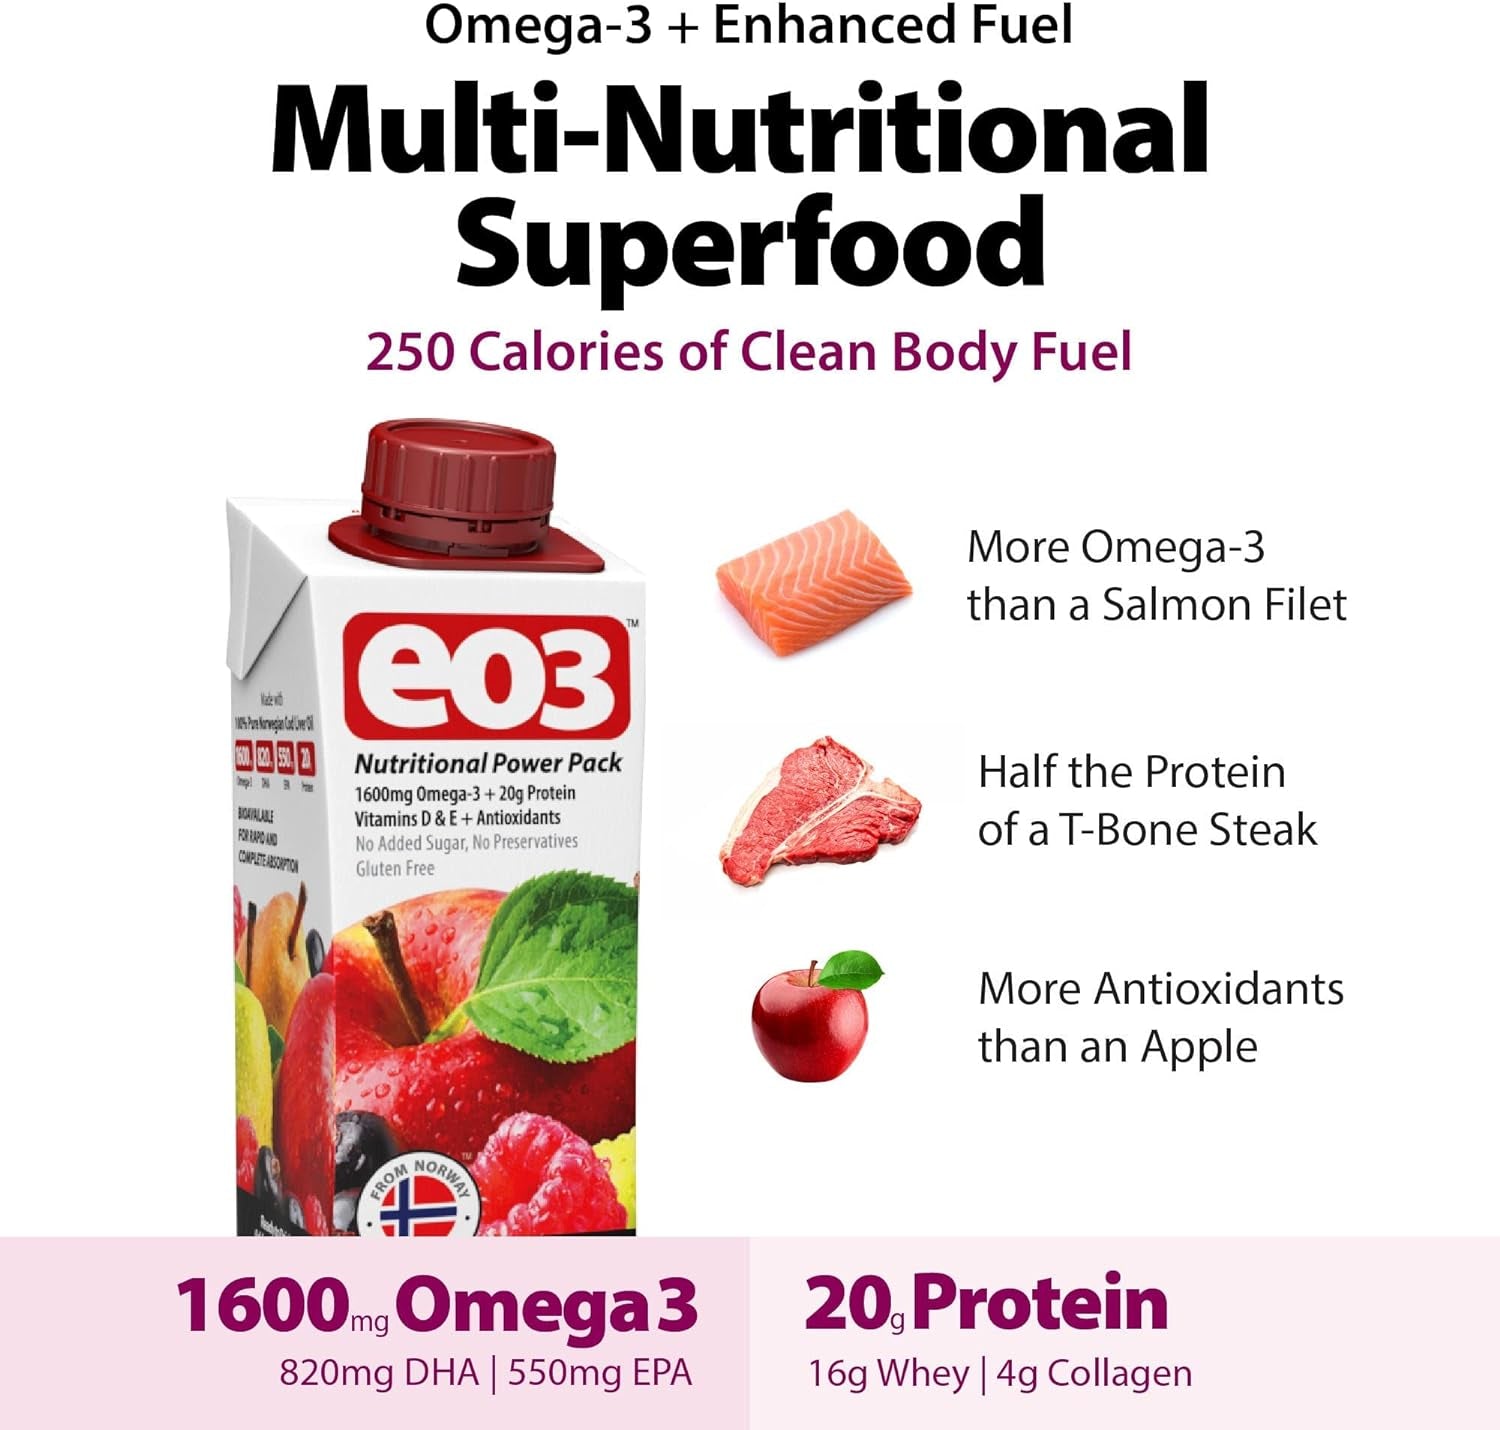 EO3 Omega-3 Multi-Nutritional Fruit Smoothie | 100% Cod Liver Oil | Whey Protein, Vitamins, Antioxidants| Gluten Free, No Added Sugar, No Preservatives | Ready-To-Drink | 24 Pack, 8.4 Fl Oz